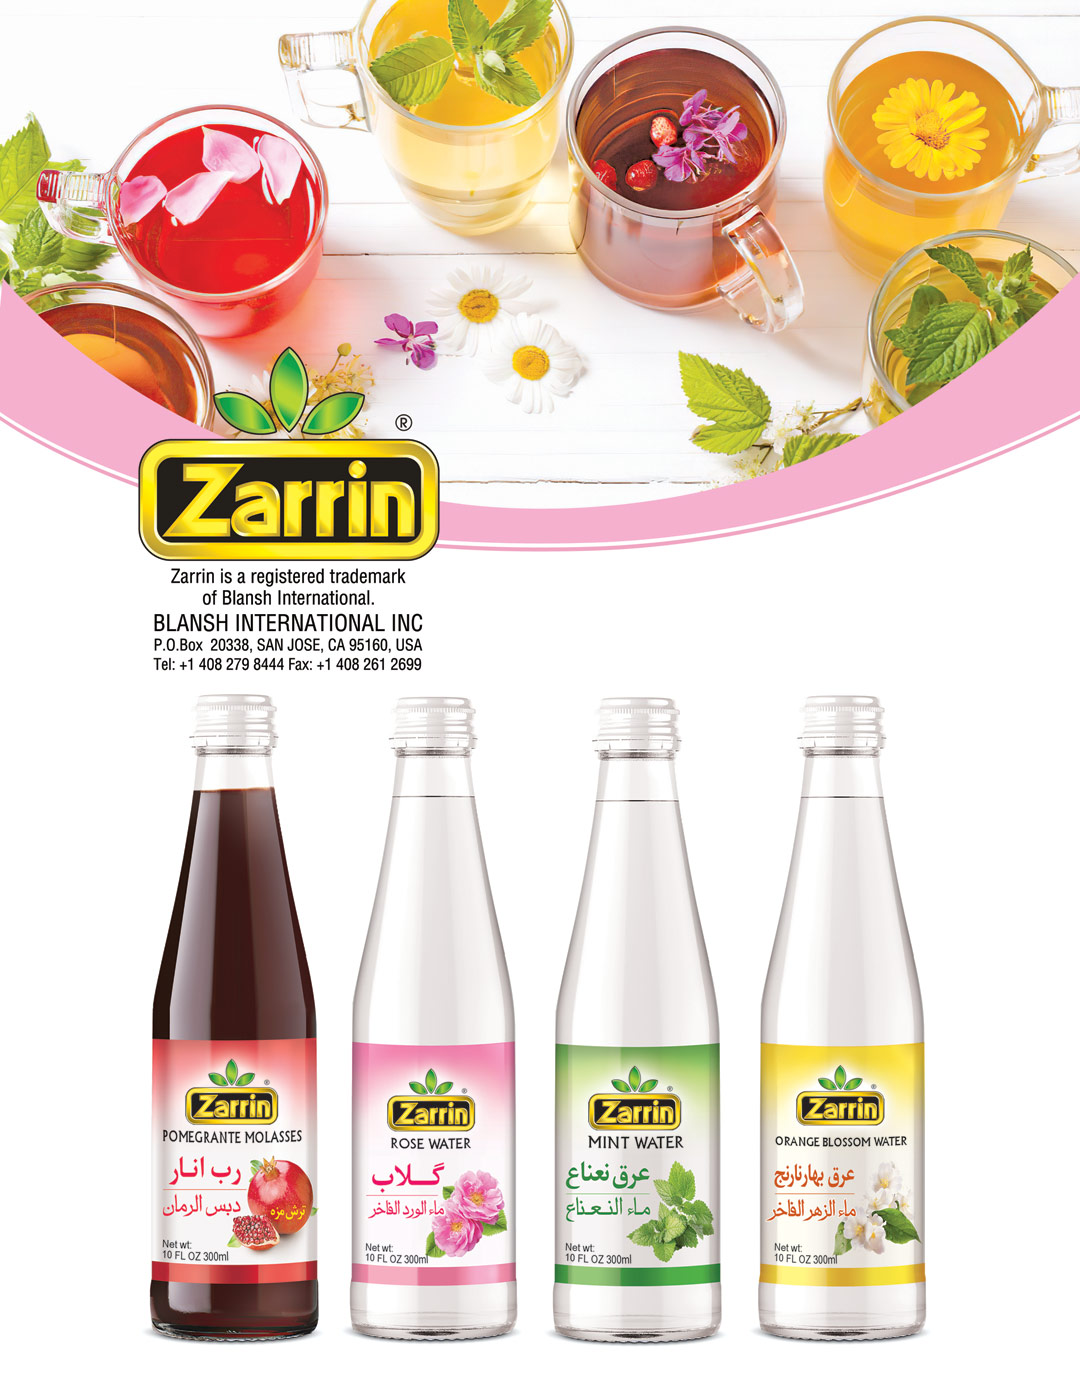 Zarrin Rose Water, Mint Water, Orange Blossom Water, and Pomegranate Molasses.